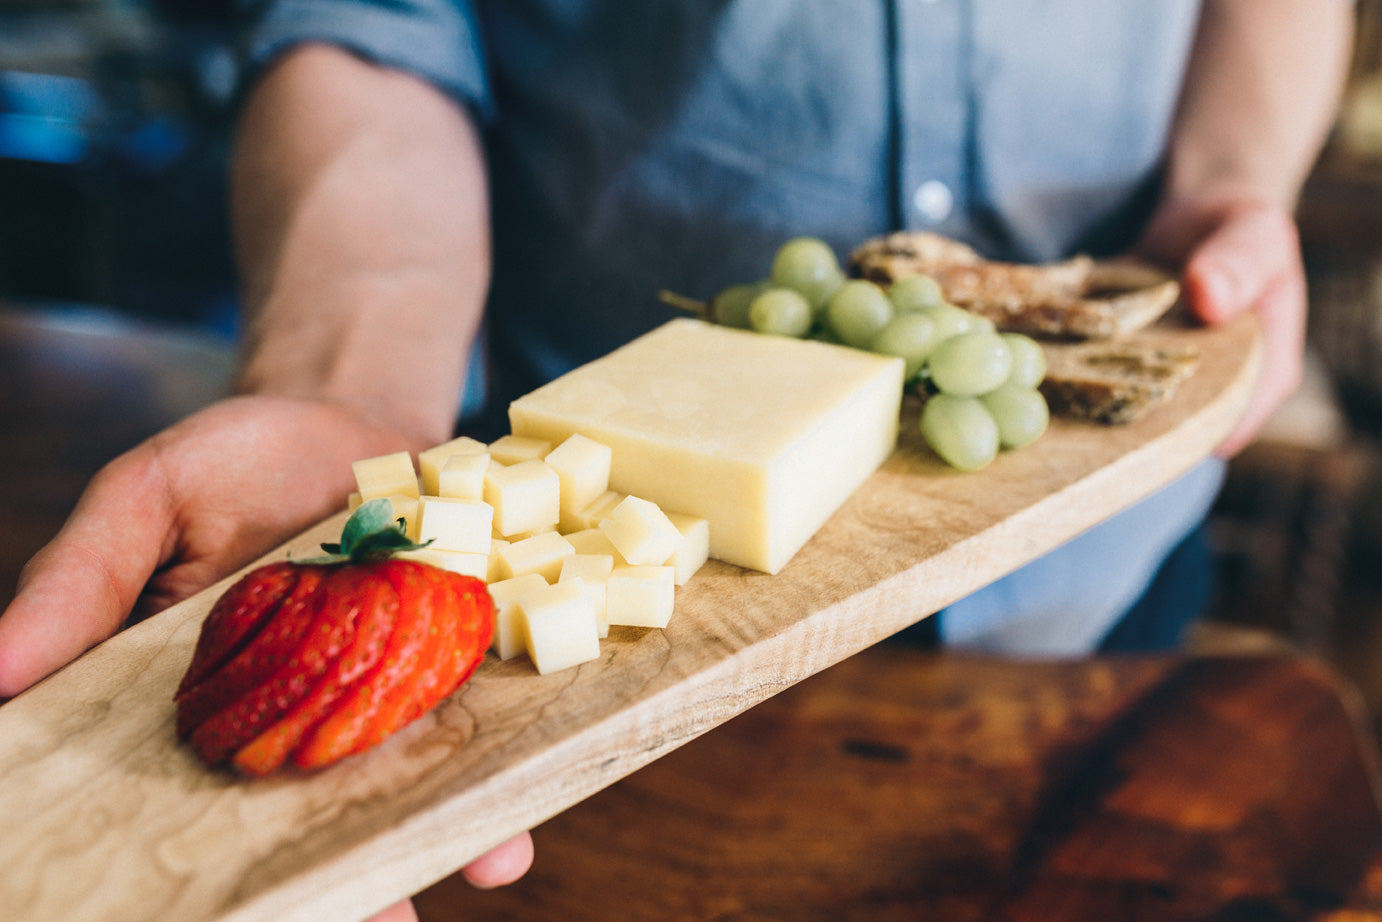 Monterey Jill cheese is served on a wooden board with sliced strawberry, grapes, and bread. The cheese is cut into cubes.